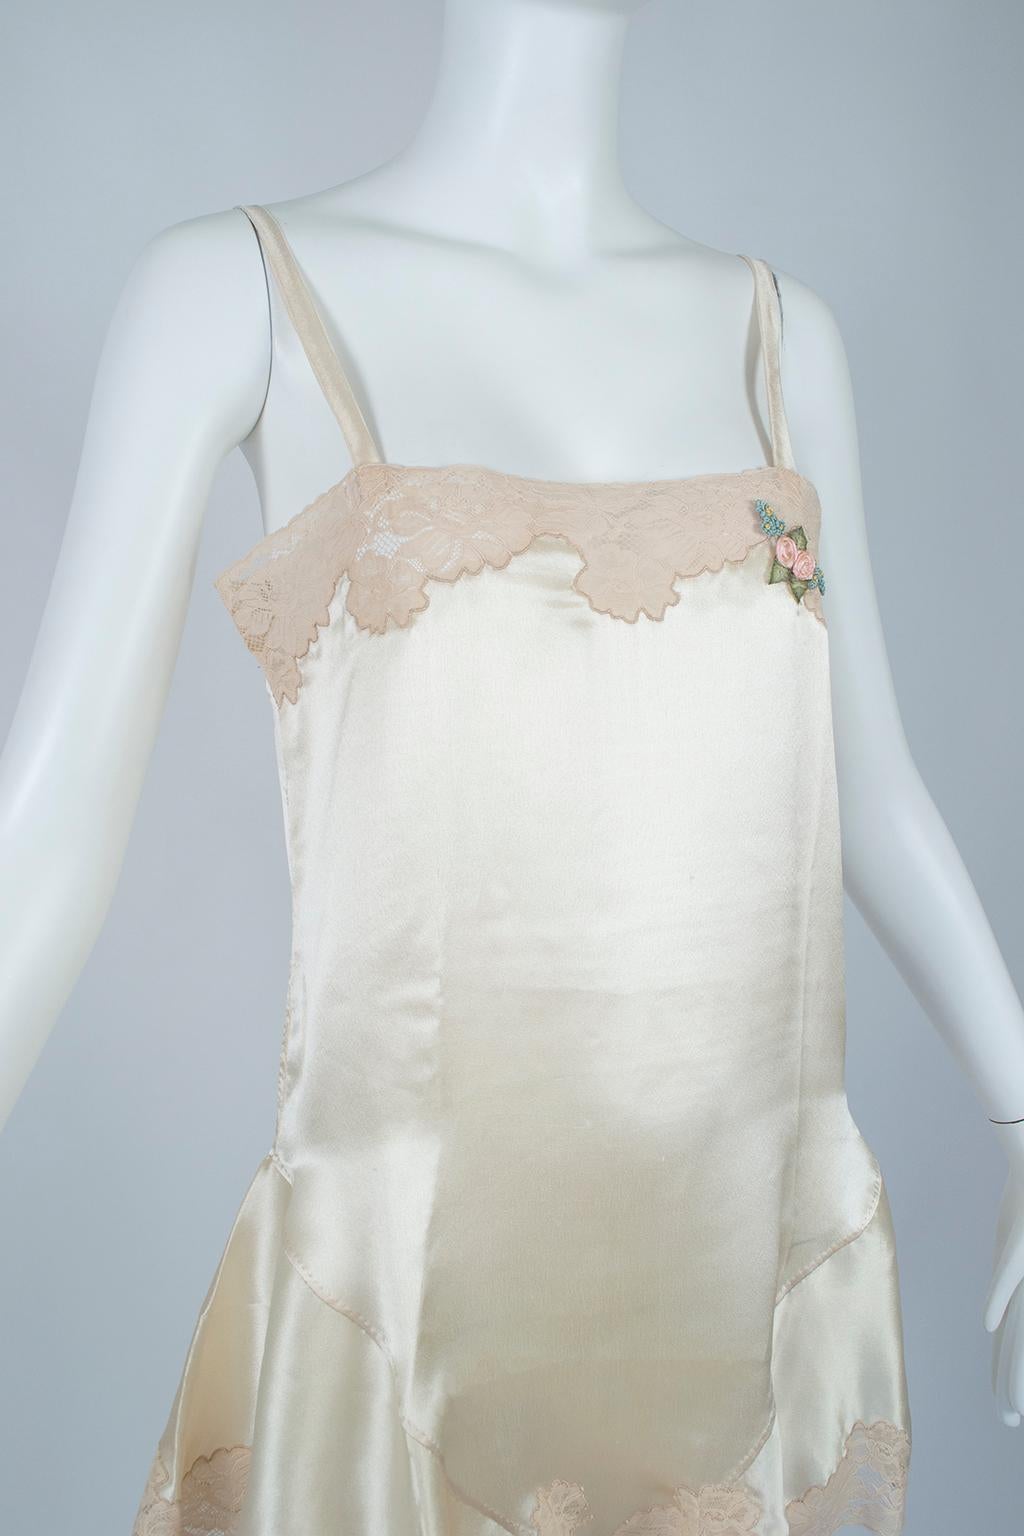 Ivory Bridal Trousseau Lacquered Satin Skirt Leg Step-In Romper Teddy –XS, 1920s In Good Condition For Sale In Tucson, AZ